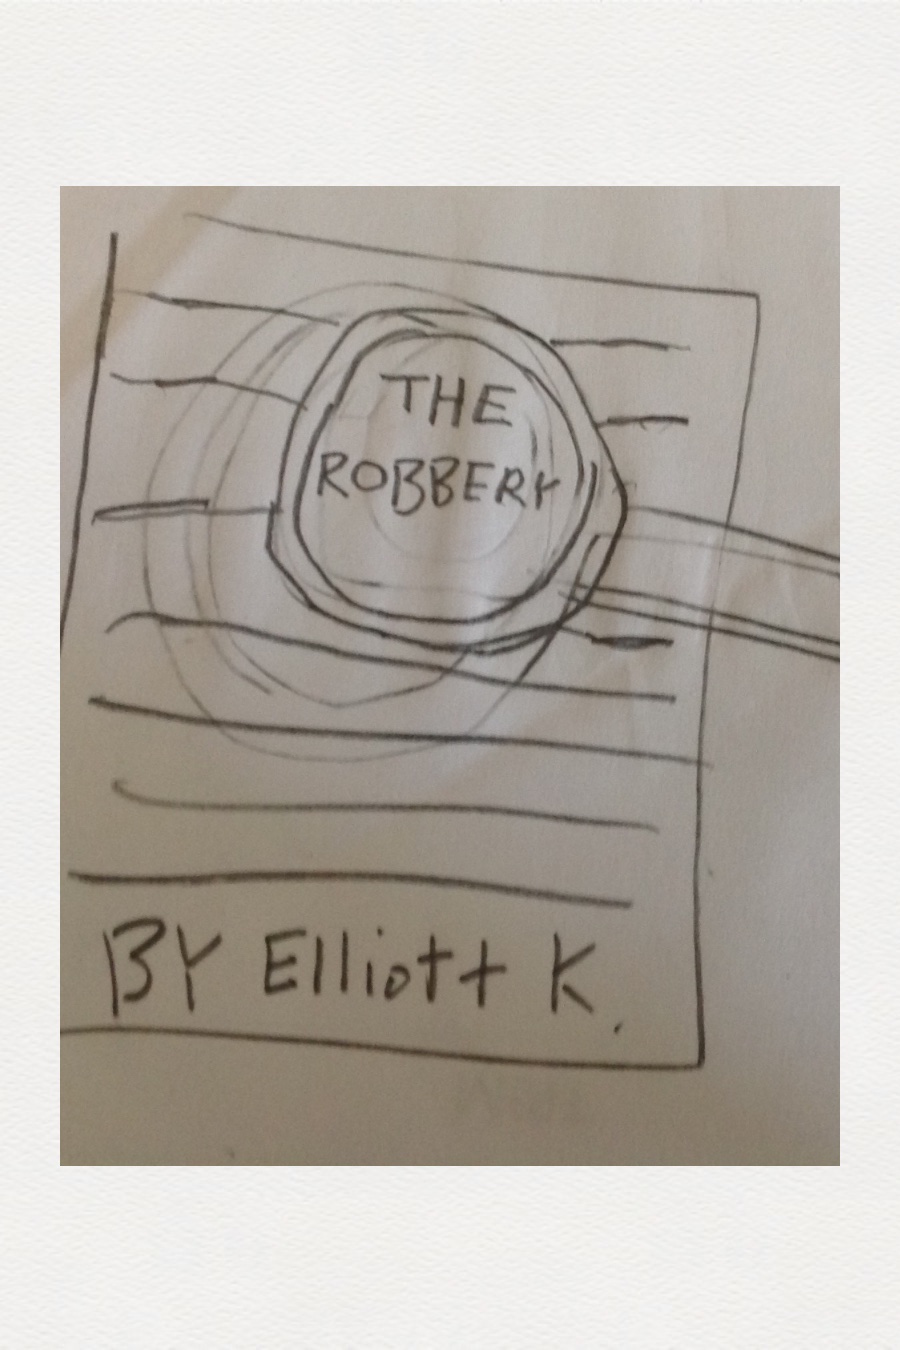 The Robbery by Elliot K (1)